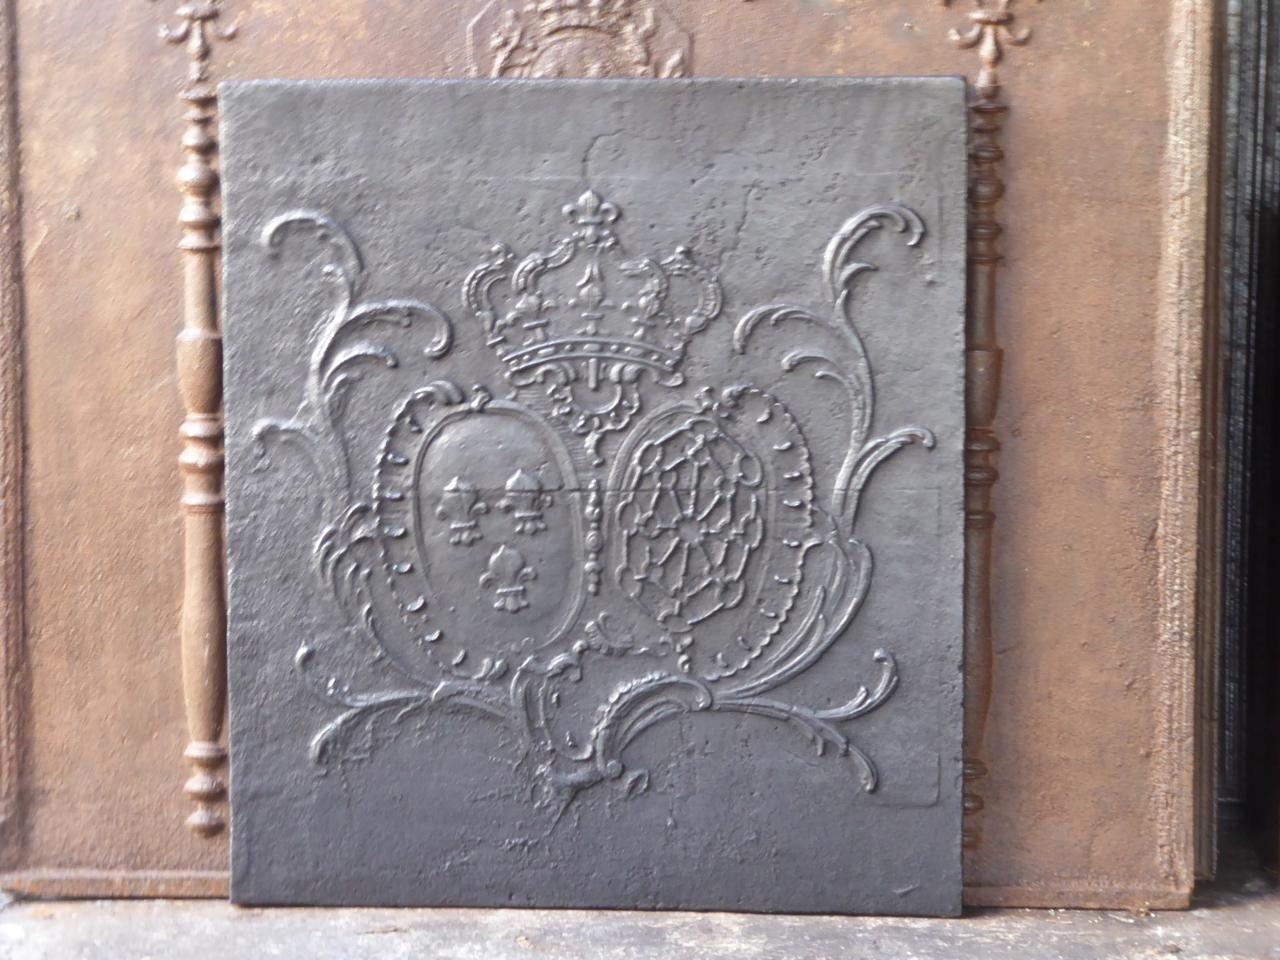 18th century French Louis XV fireback with the arms of France and the arms of Navarre combined. The arms of France are the arms of the House of Bourbon. This is one of the major royal dynasties of Europe that produced monarchs of Spain (Navarre),